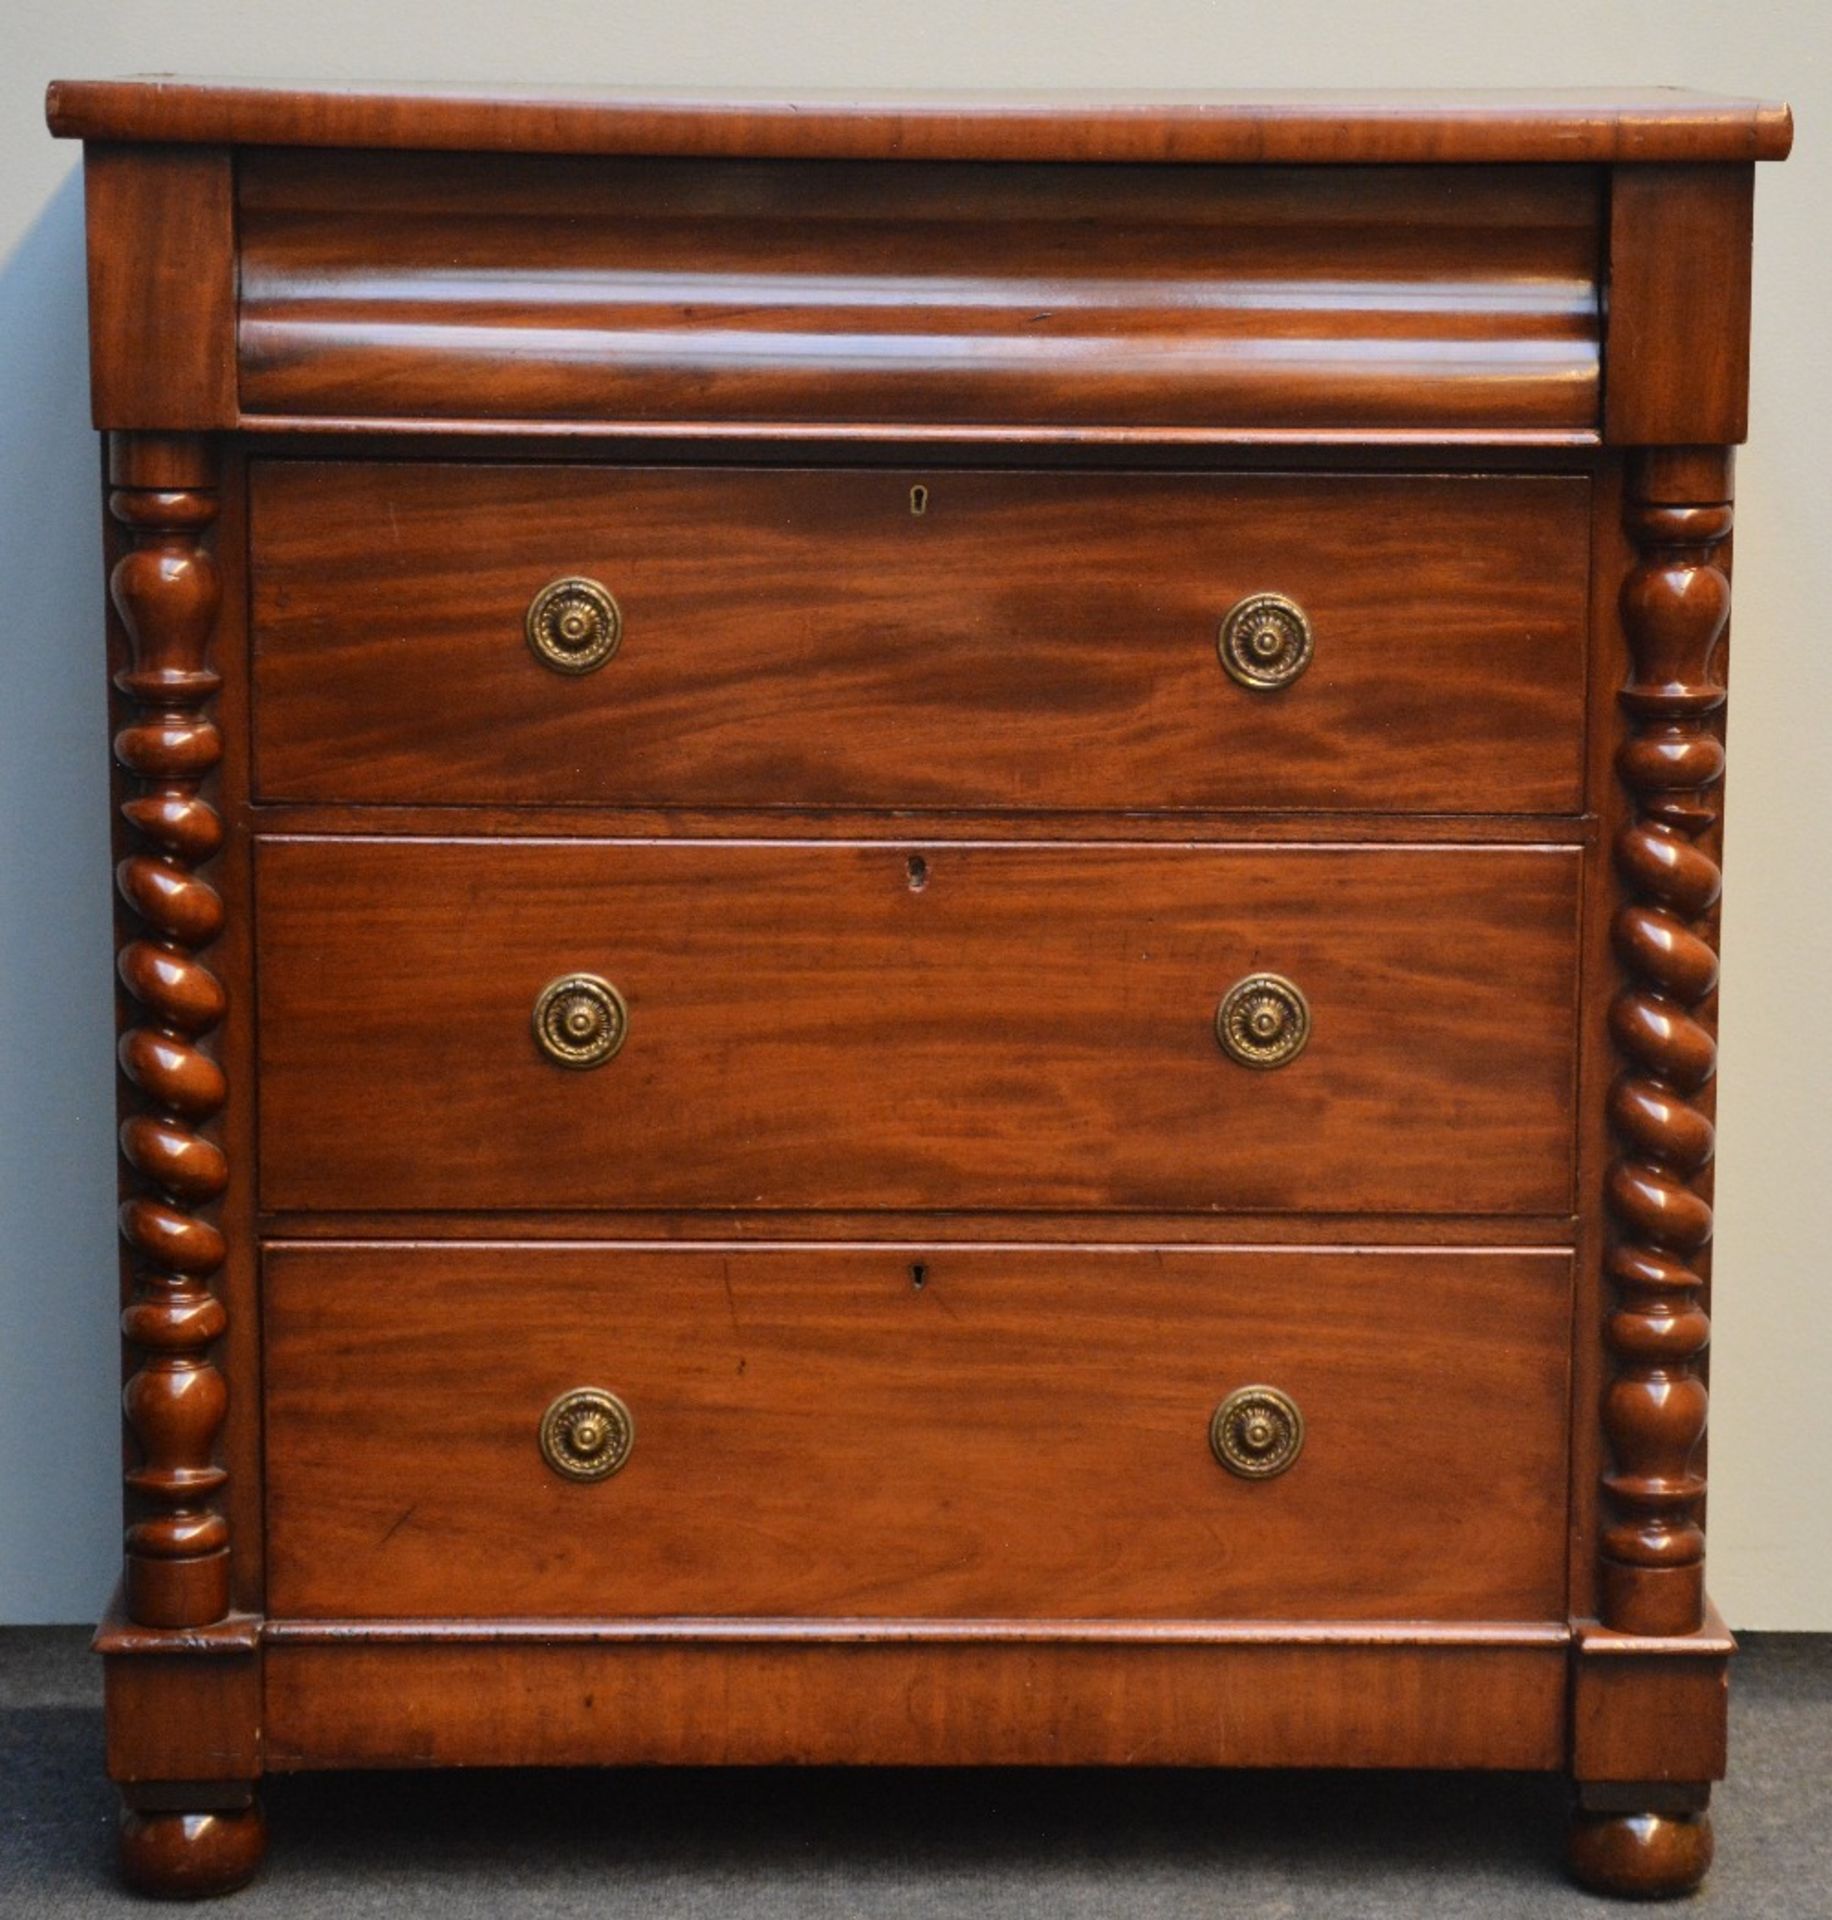 A Victorian mahogany secr¨¦taire-commode, 19thC, H 120,5 - W 111,5 - D 50,5 cm